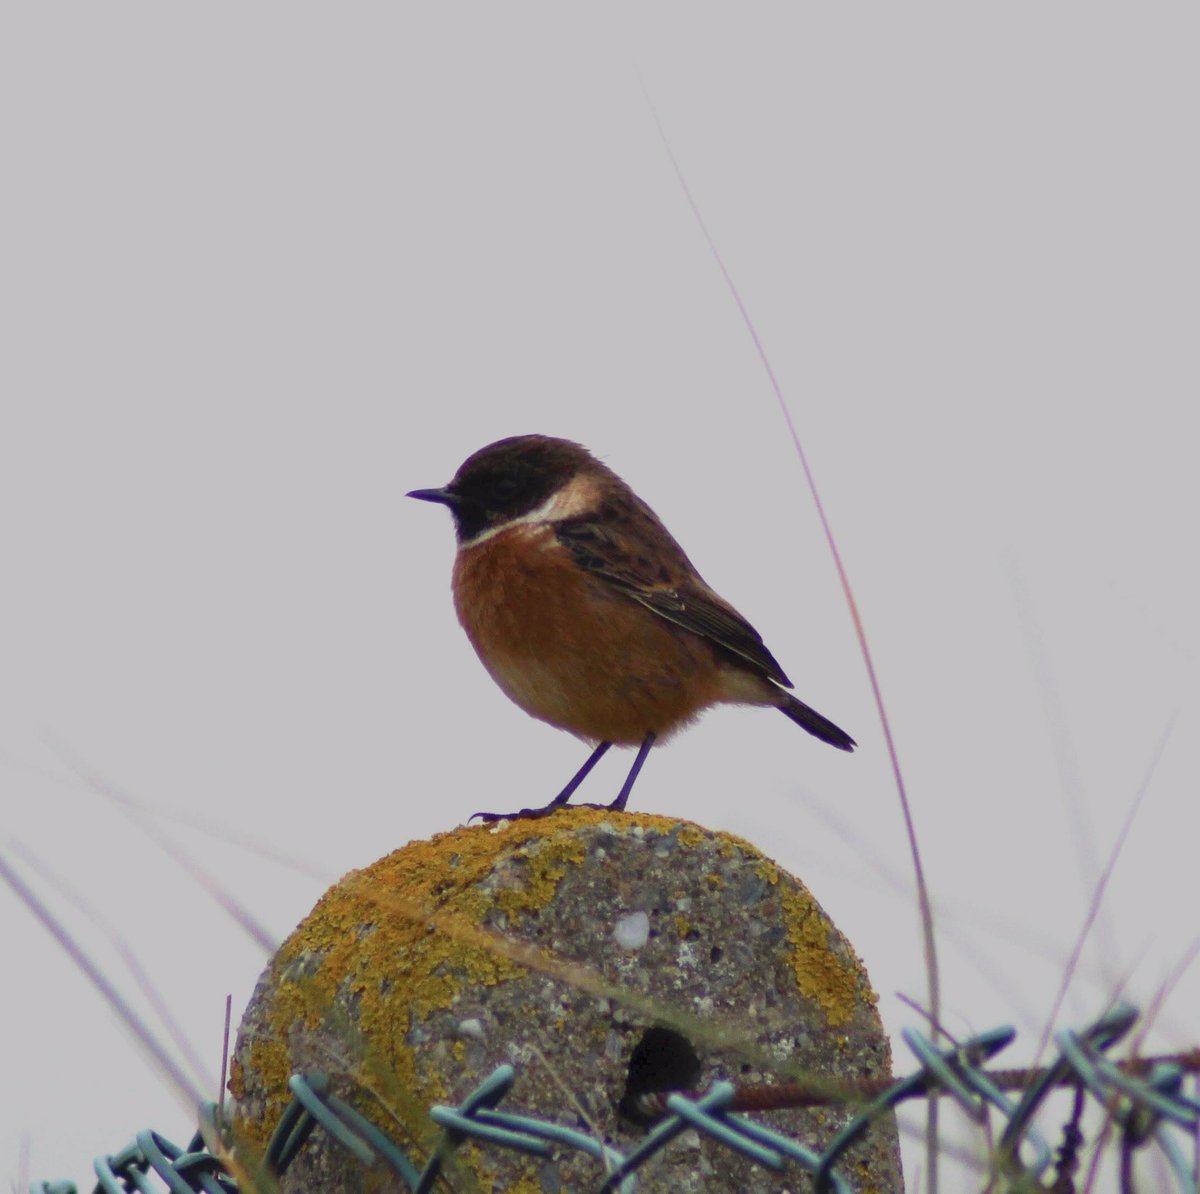 A stunning Stonechat on North Bull Island today at the sand dunnes. I think it’s a male 💖 #birdphotography  #birding #wildlifephotography #nature #NaturePhotography #stonechat #bullisland